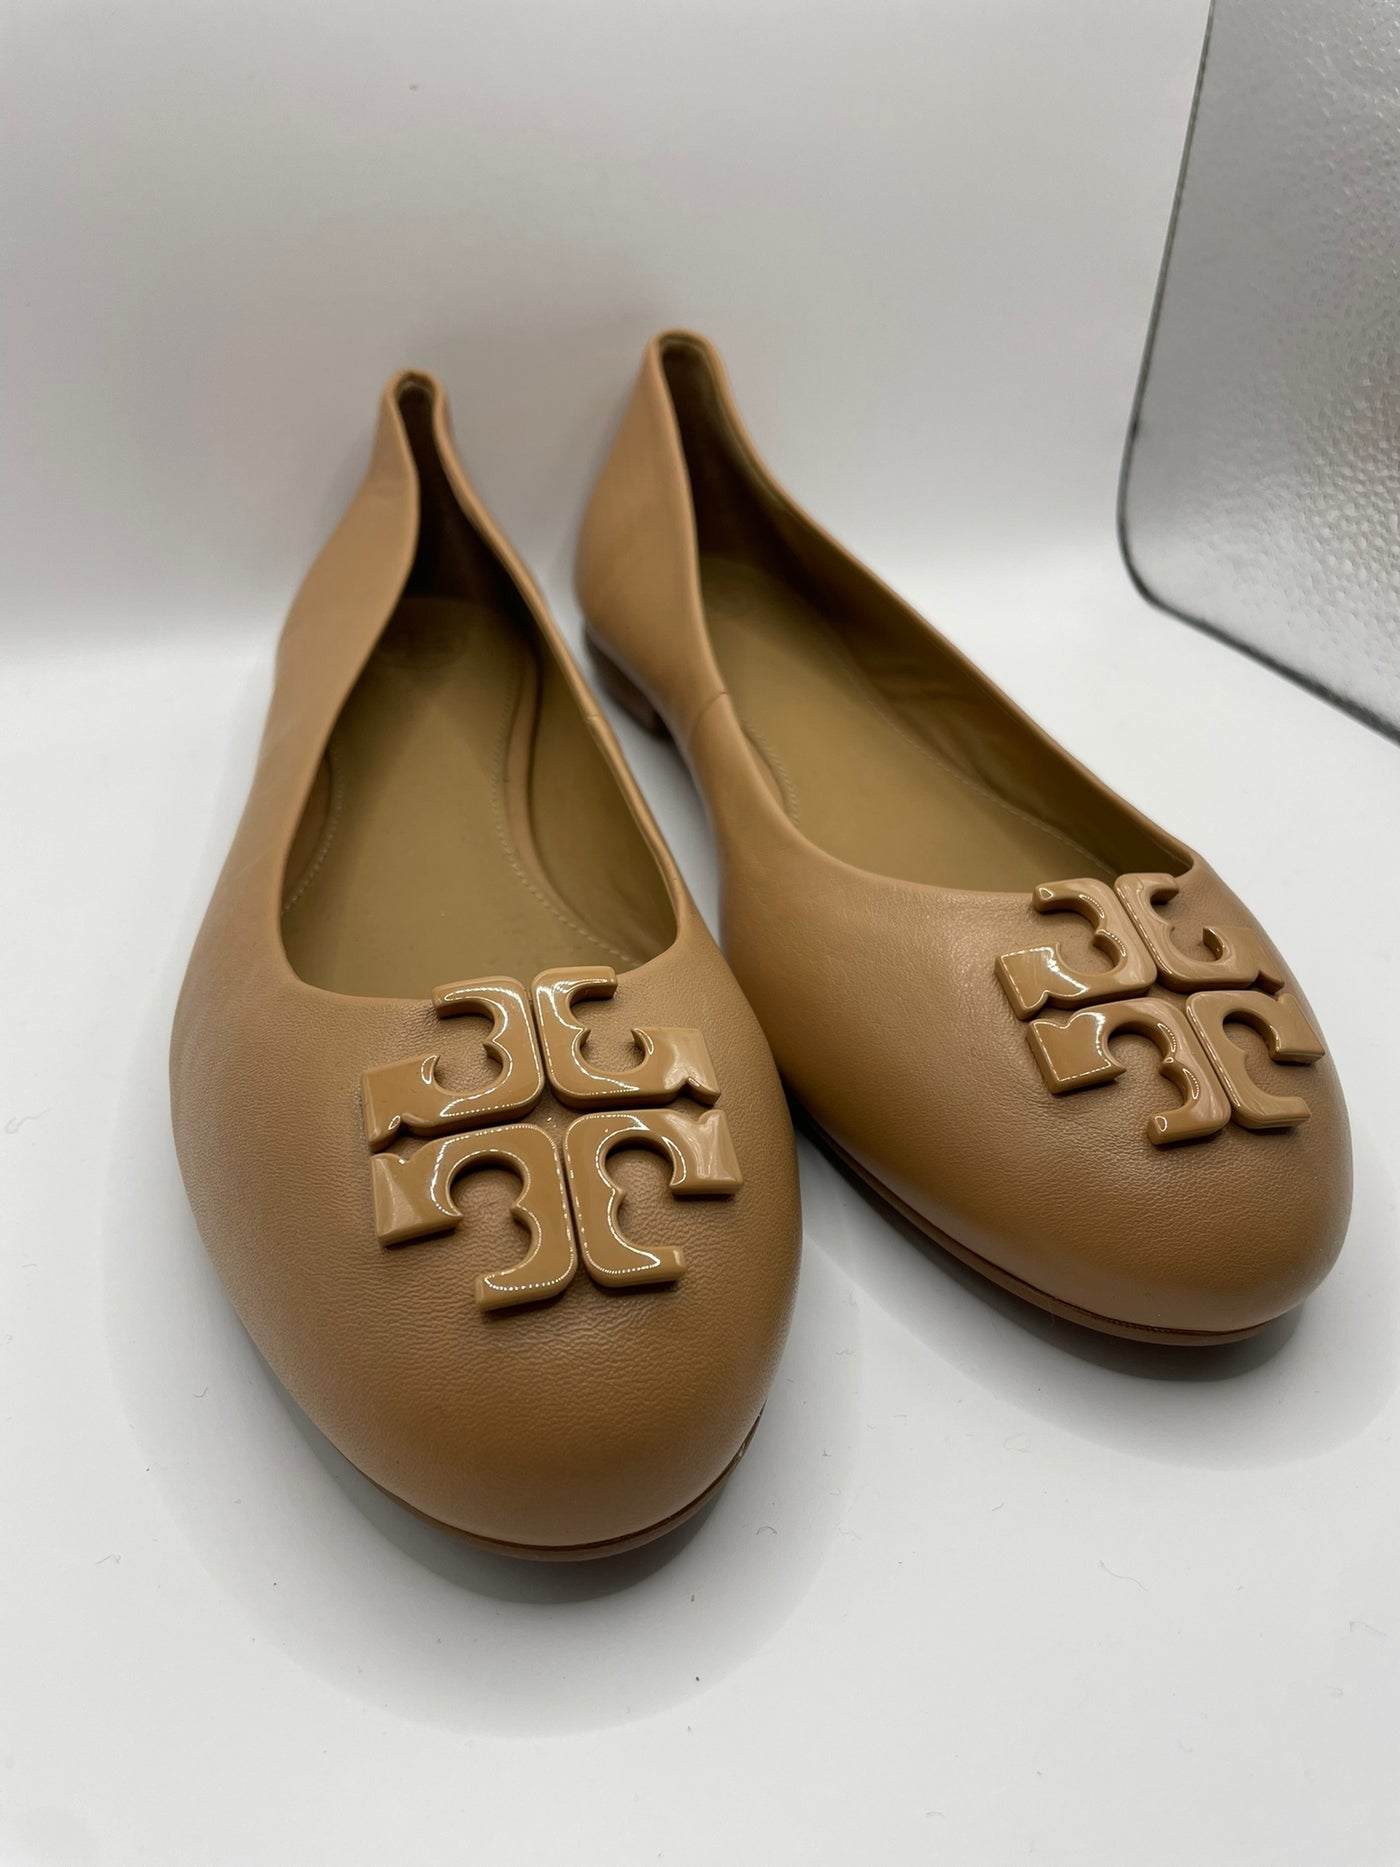 Tory Burch BRAND NEW leather tan pumps size 39.5